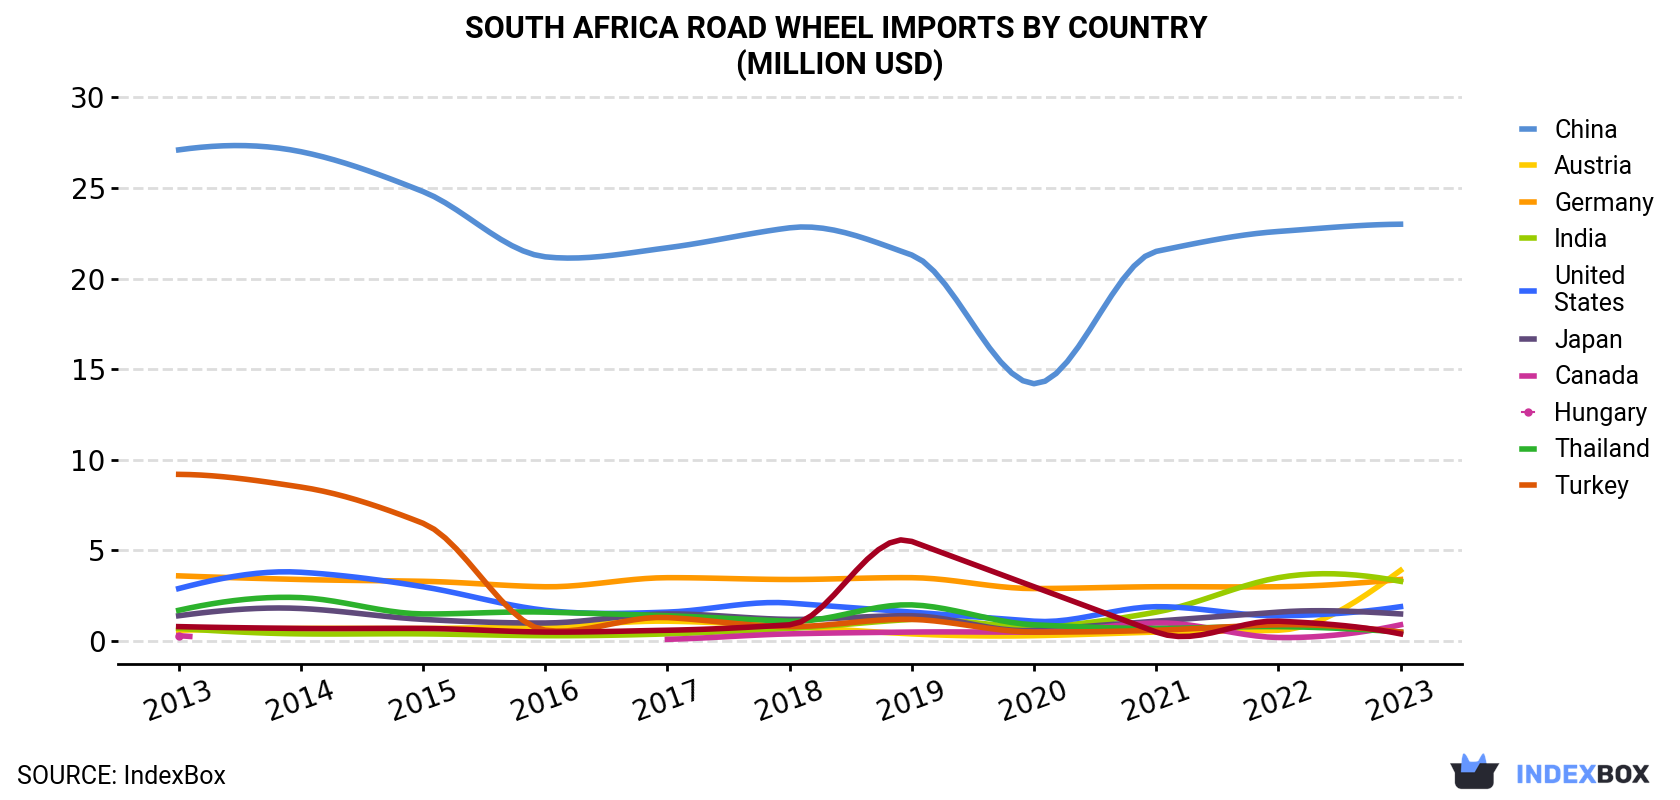 South Africa Road Wheel Imports By Country (Million USD)